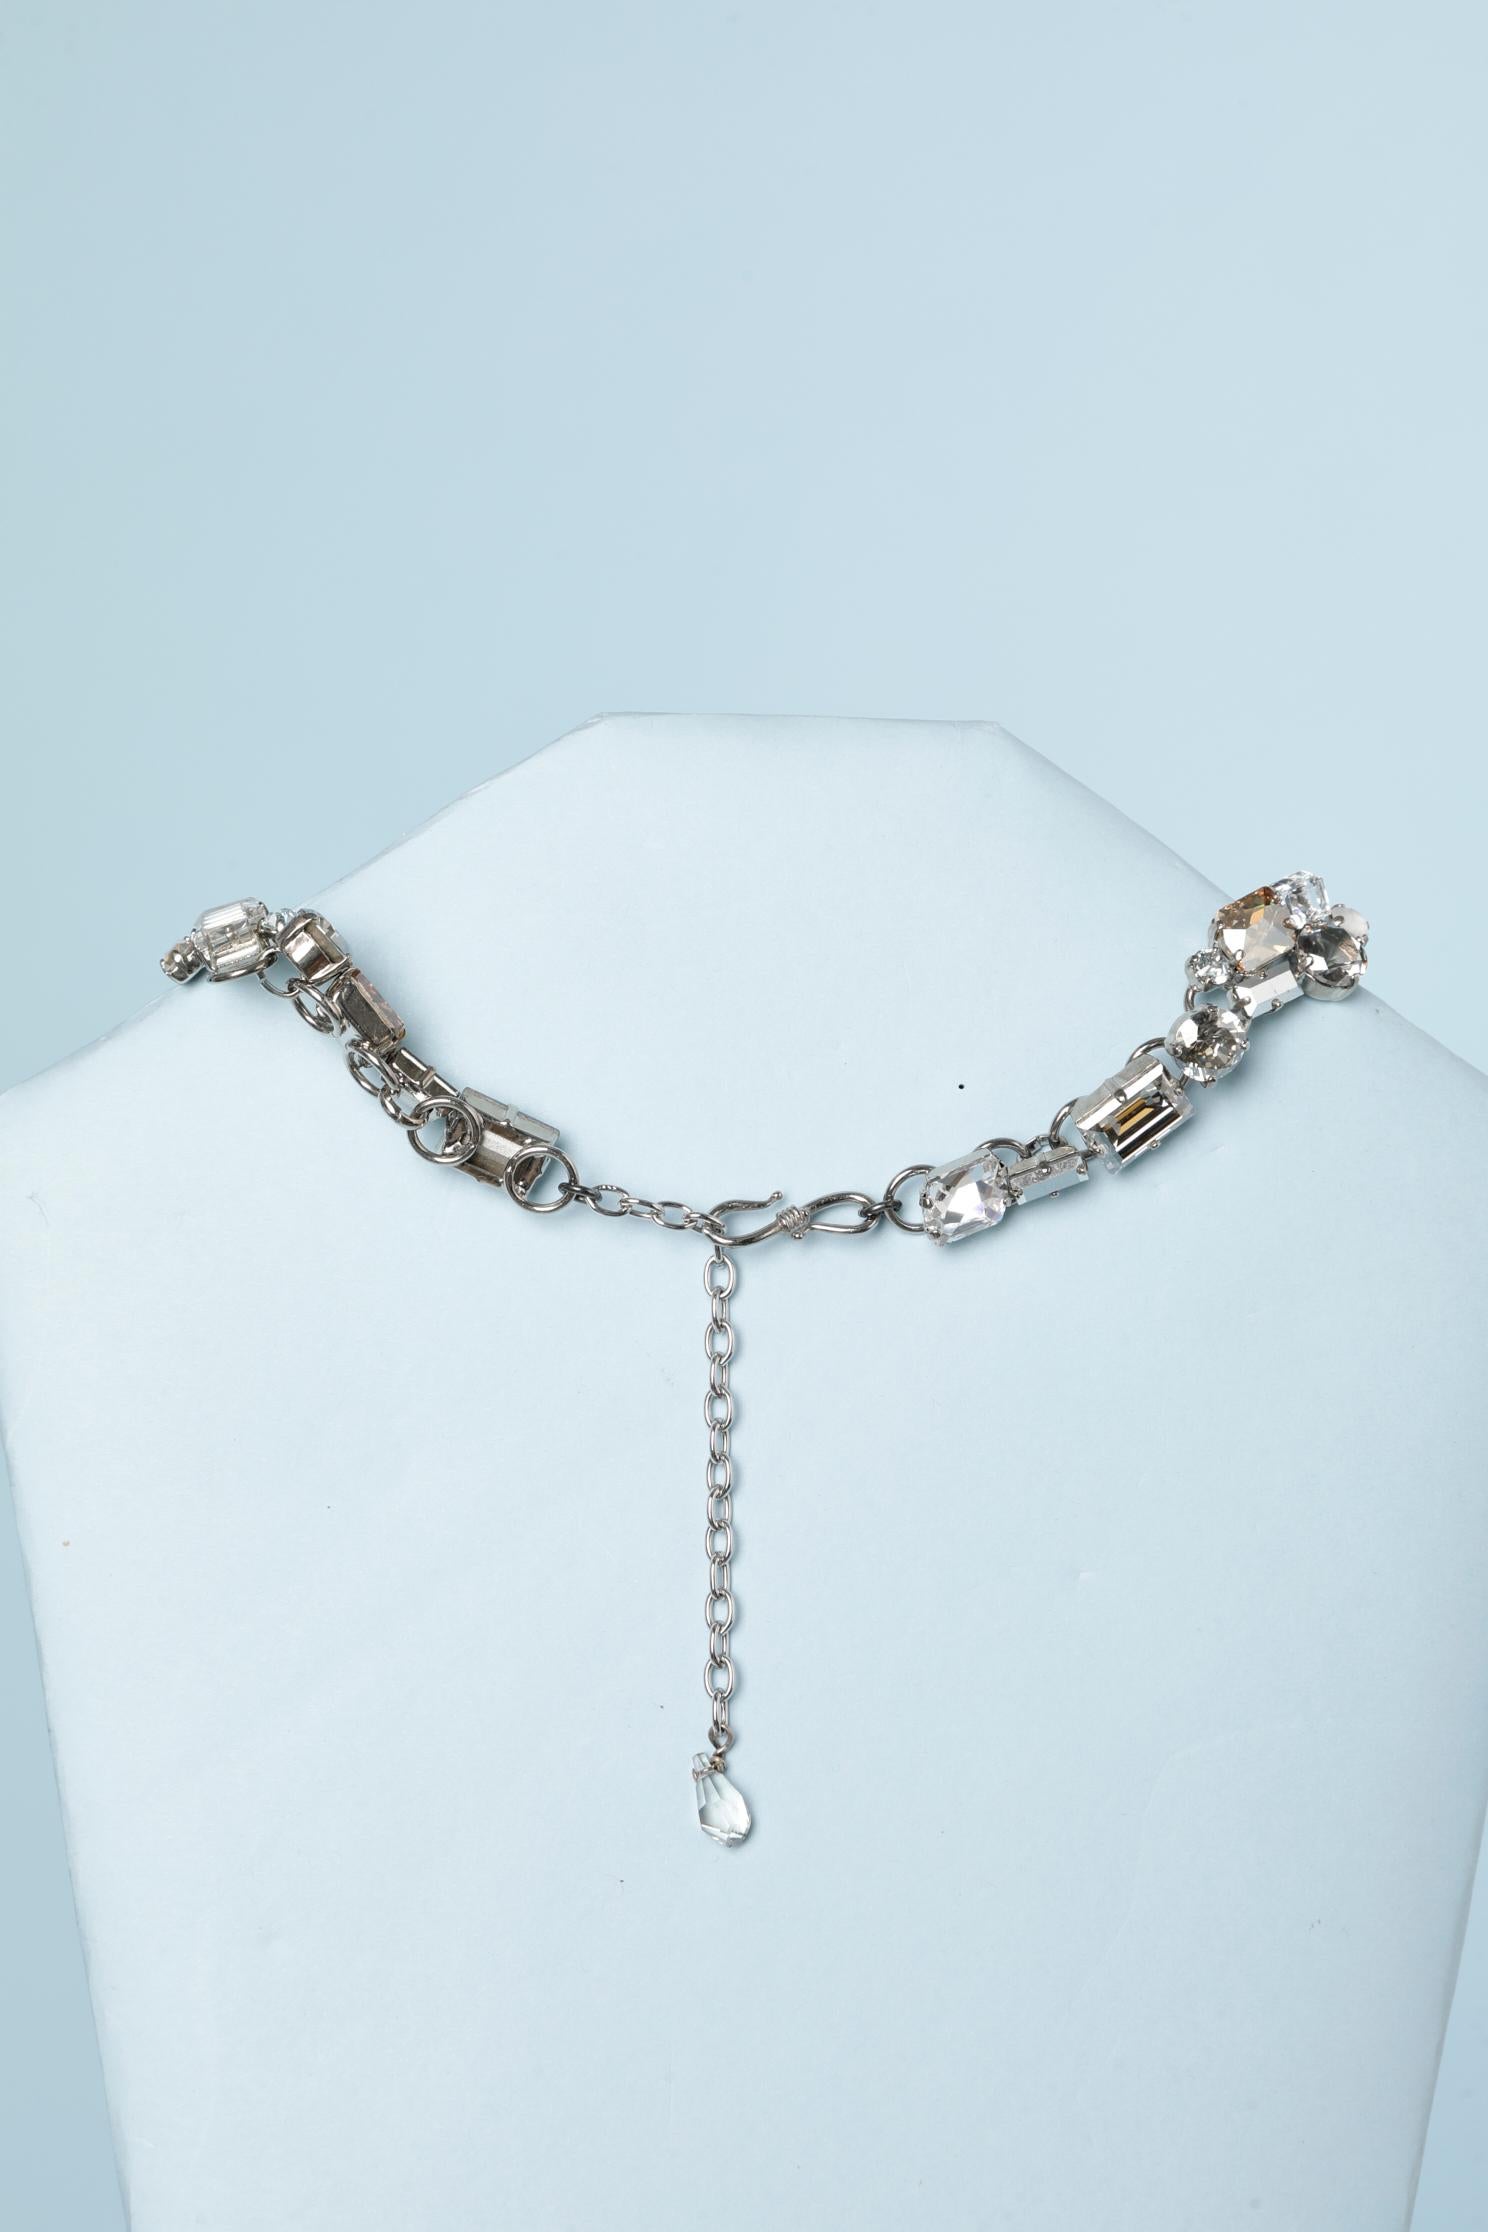 Women's Drop necklace made of metal, chain, rhinestone and glass beads Circa 2010 For Sale